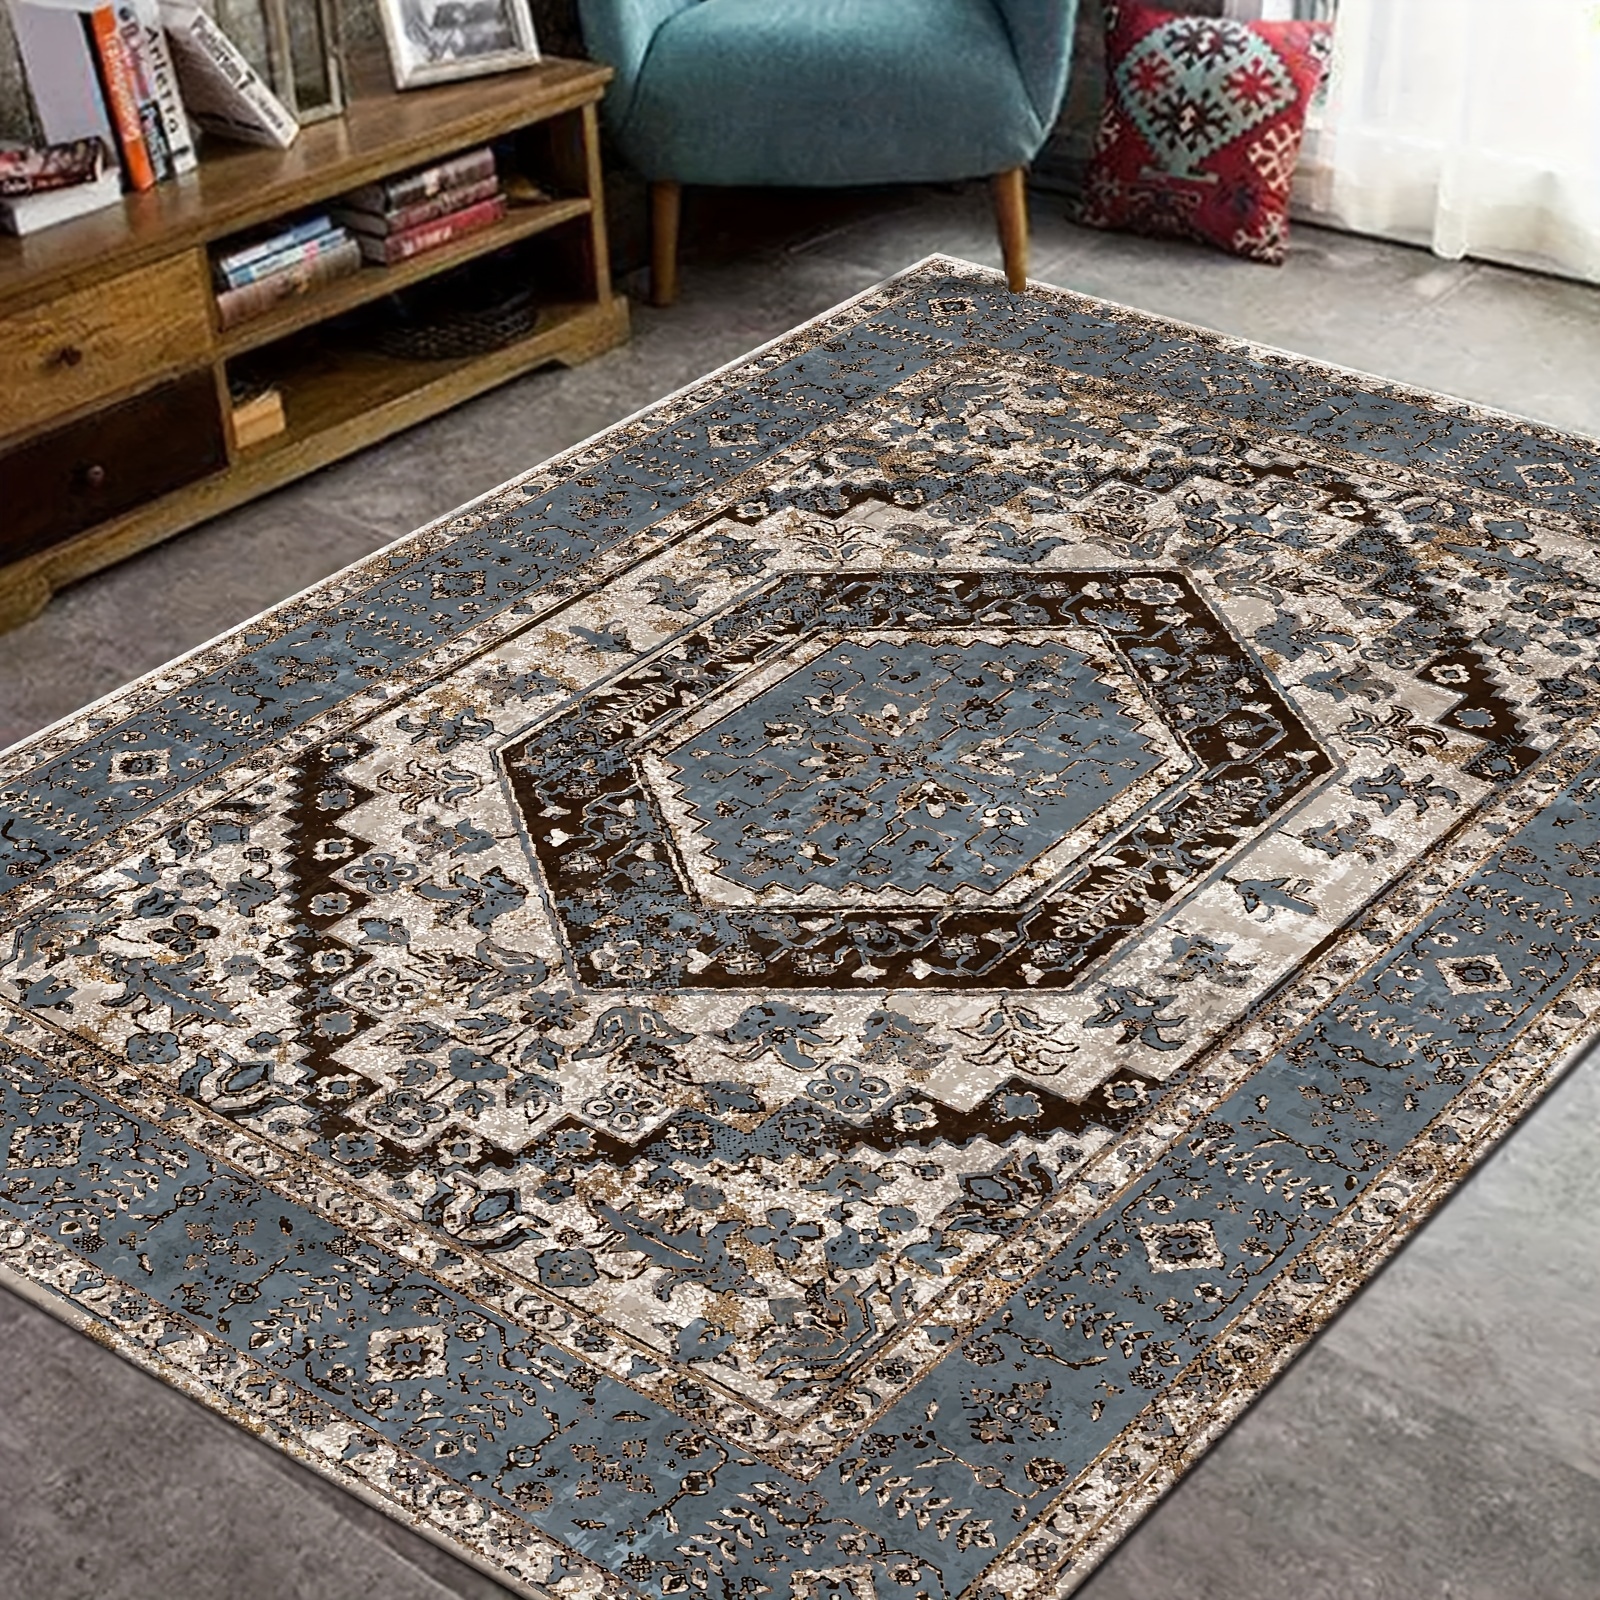 1pc Luxury Moroccan Vintage Boho Persian Carpet - Non-Shedding Ethnic Style  Rug for Living Room, Bedroom, Coffee Table, Dining Room, Machine Washable